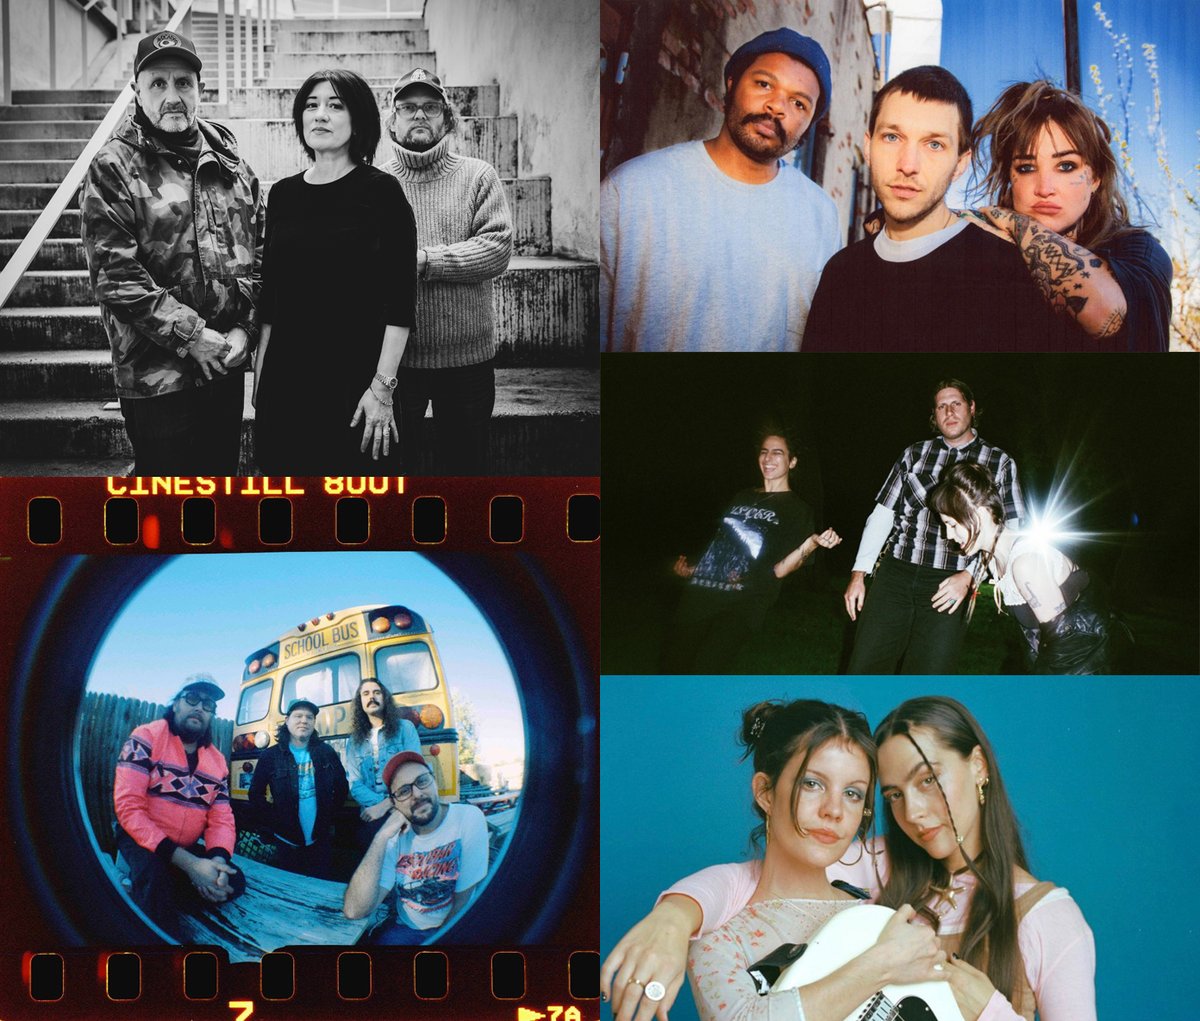 This week's Songs of the Week include the latest tracks by Miki Berenyi Trio (@berenyi_miki), Good Looks (@goodlooksband), Dehd (@FatPossum), Sour Widows (@sourwidows), Jay Som (@jaysomband), Ducks Ltd. (@ducksltdband), and more. undertheradarmag.com/news/10_best_s…